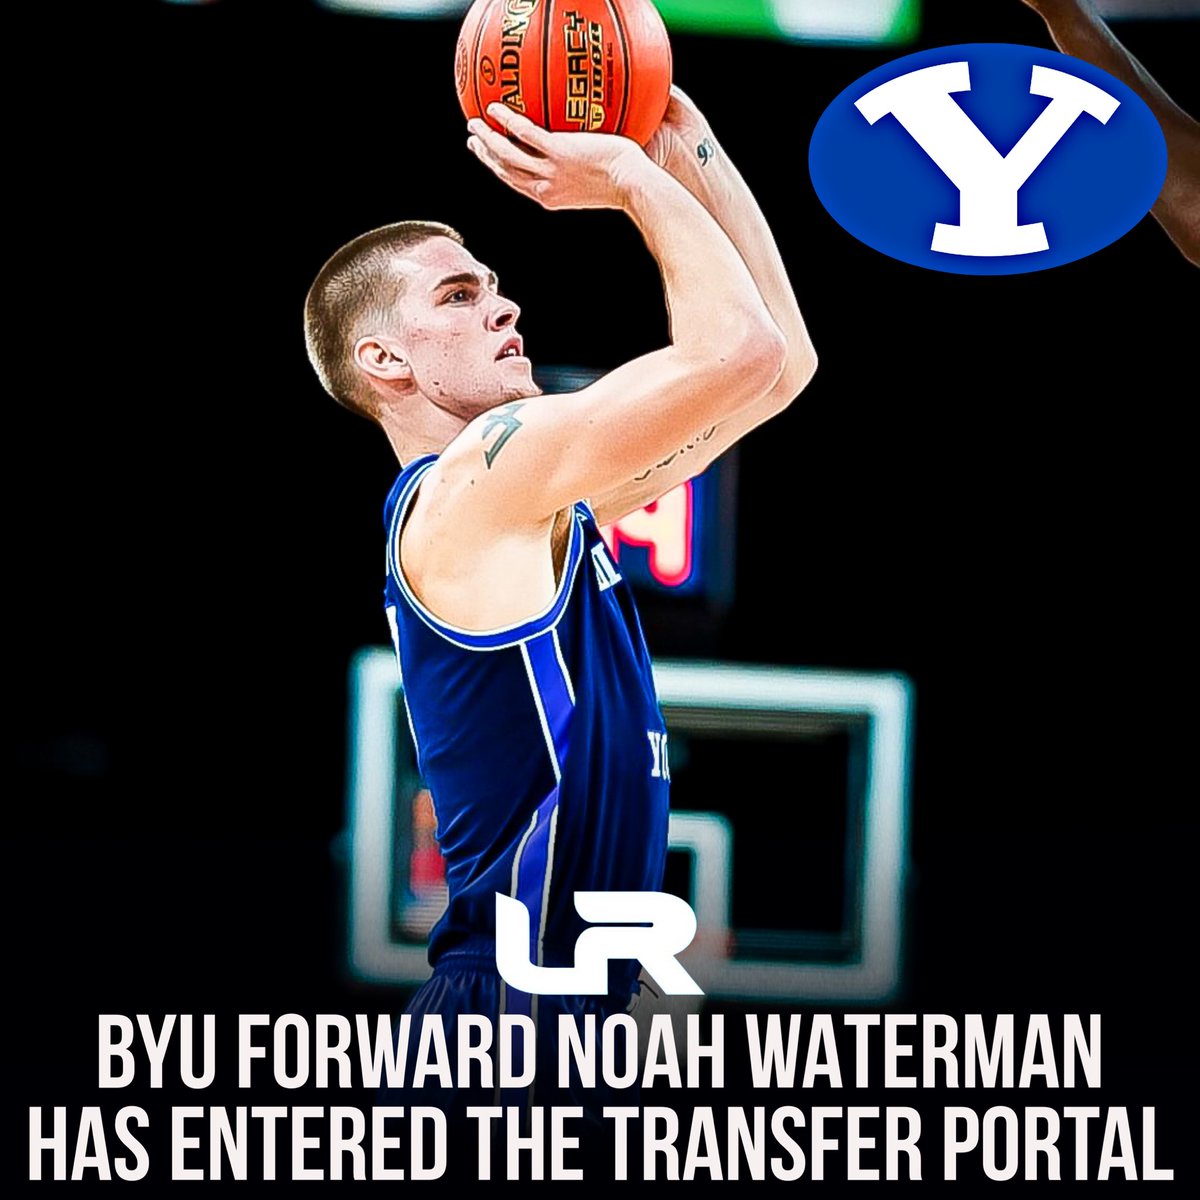 NEWS: BYU forward Noah Waterman has entered the transfer portal, source confirmed to @LeagueRDY. Waterman began his career playing his first two seasons at Detroit before spending the last two at BYU. He’s a native of Savannah, New York. He averaged 9.5PPG and 5.4RPG while…